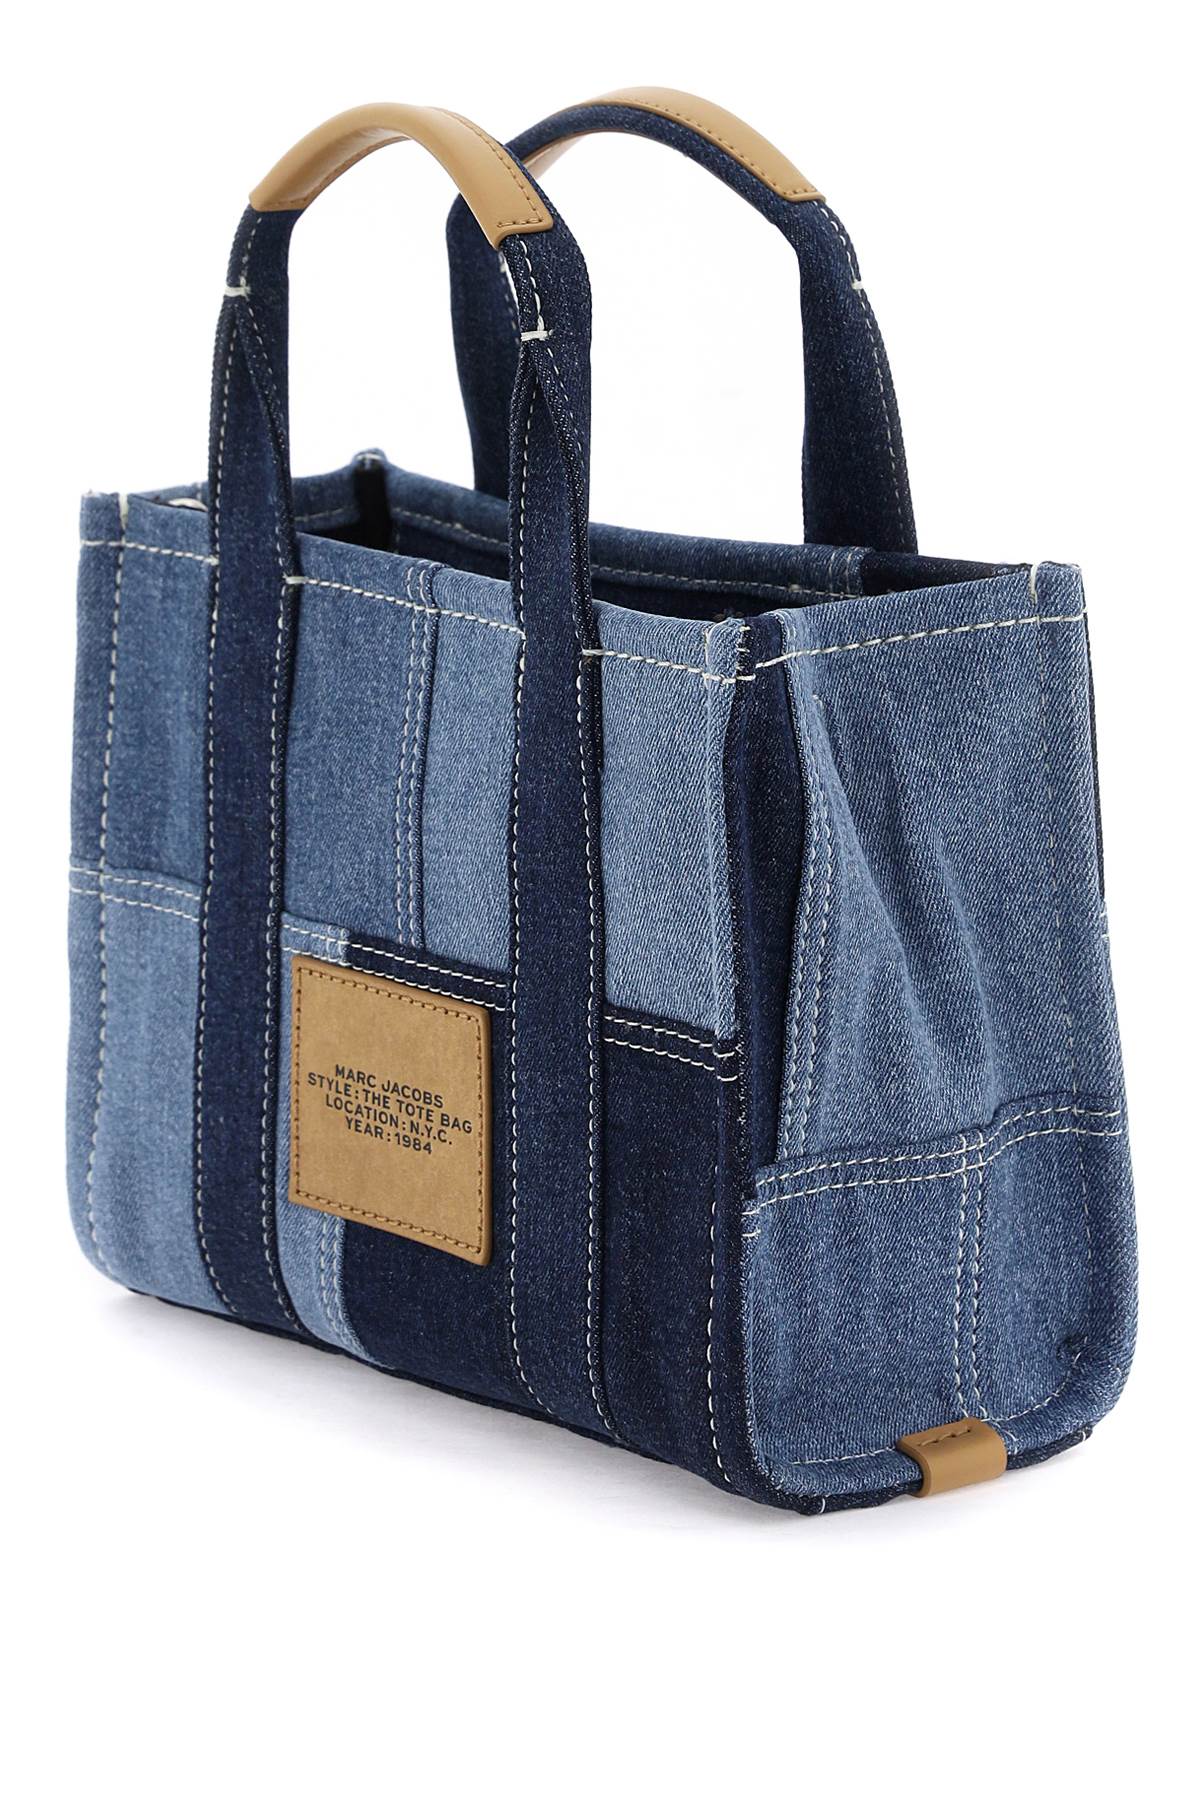 Marc Jacobs The Denim Small Tote Bag   Blue